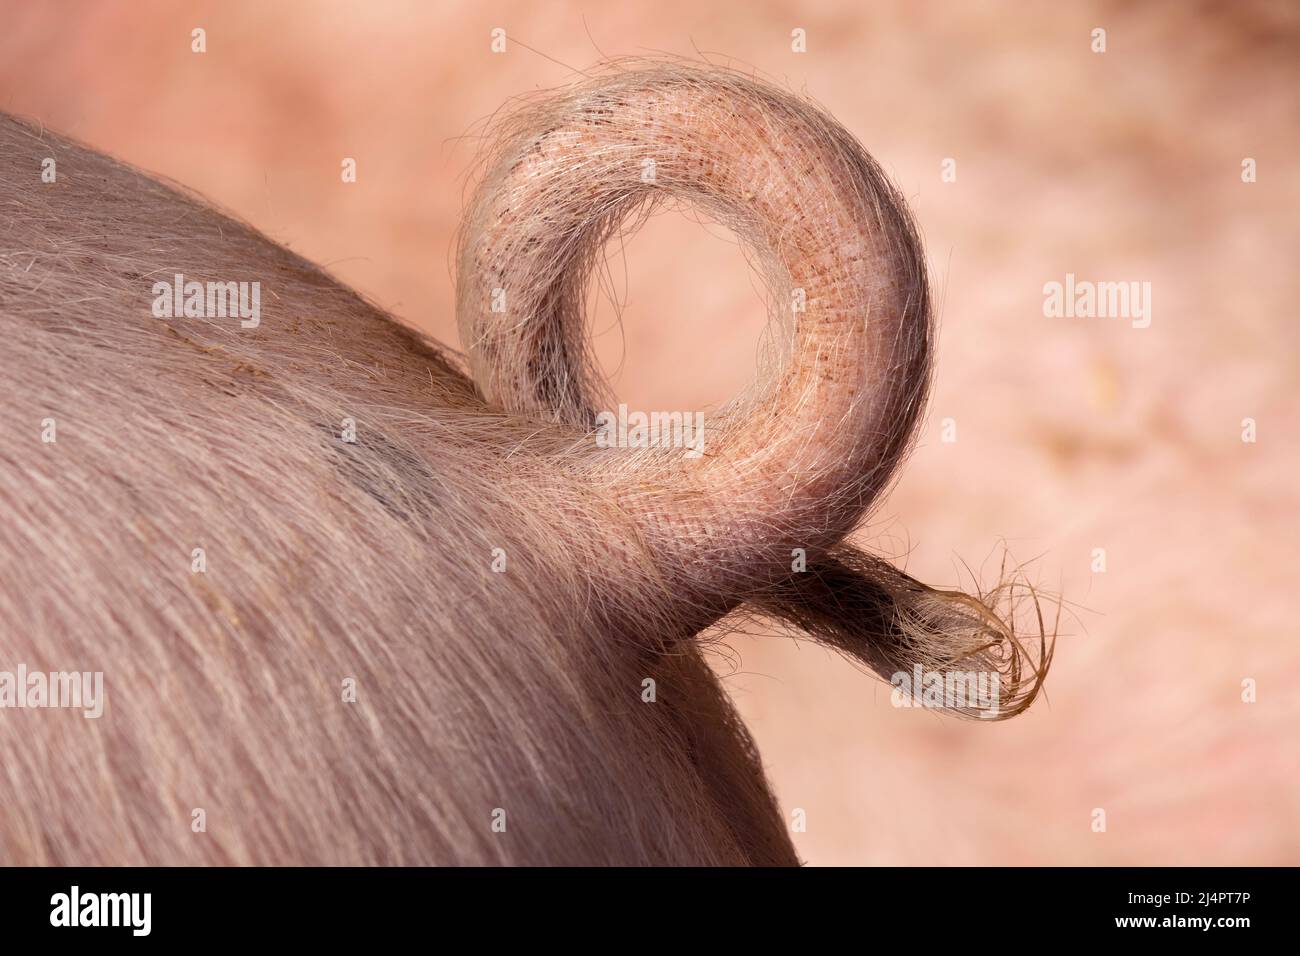 Natural curly hairy pigtail close up Stock Photo